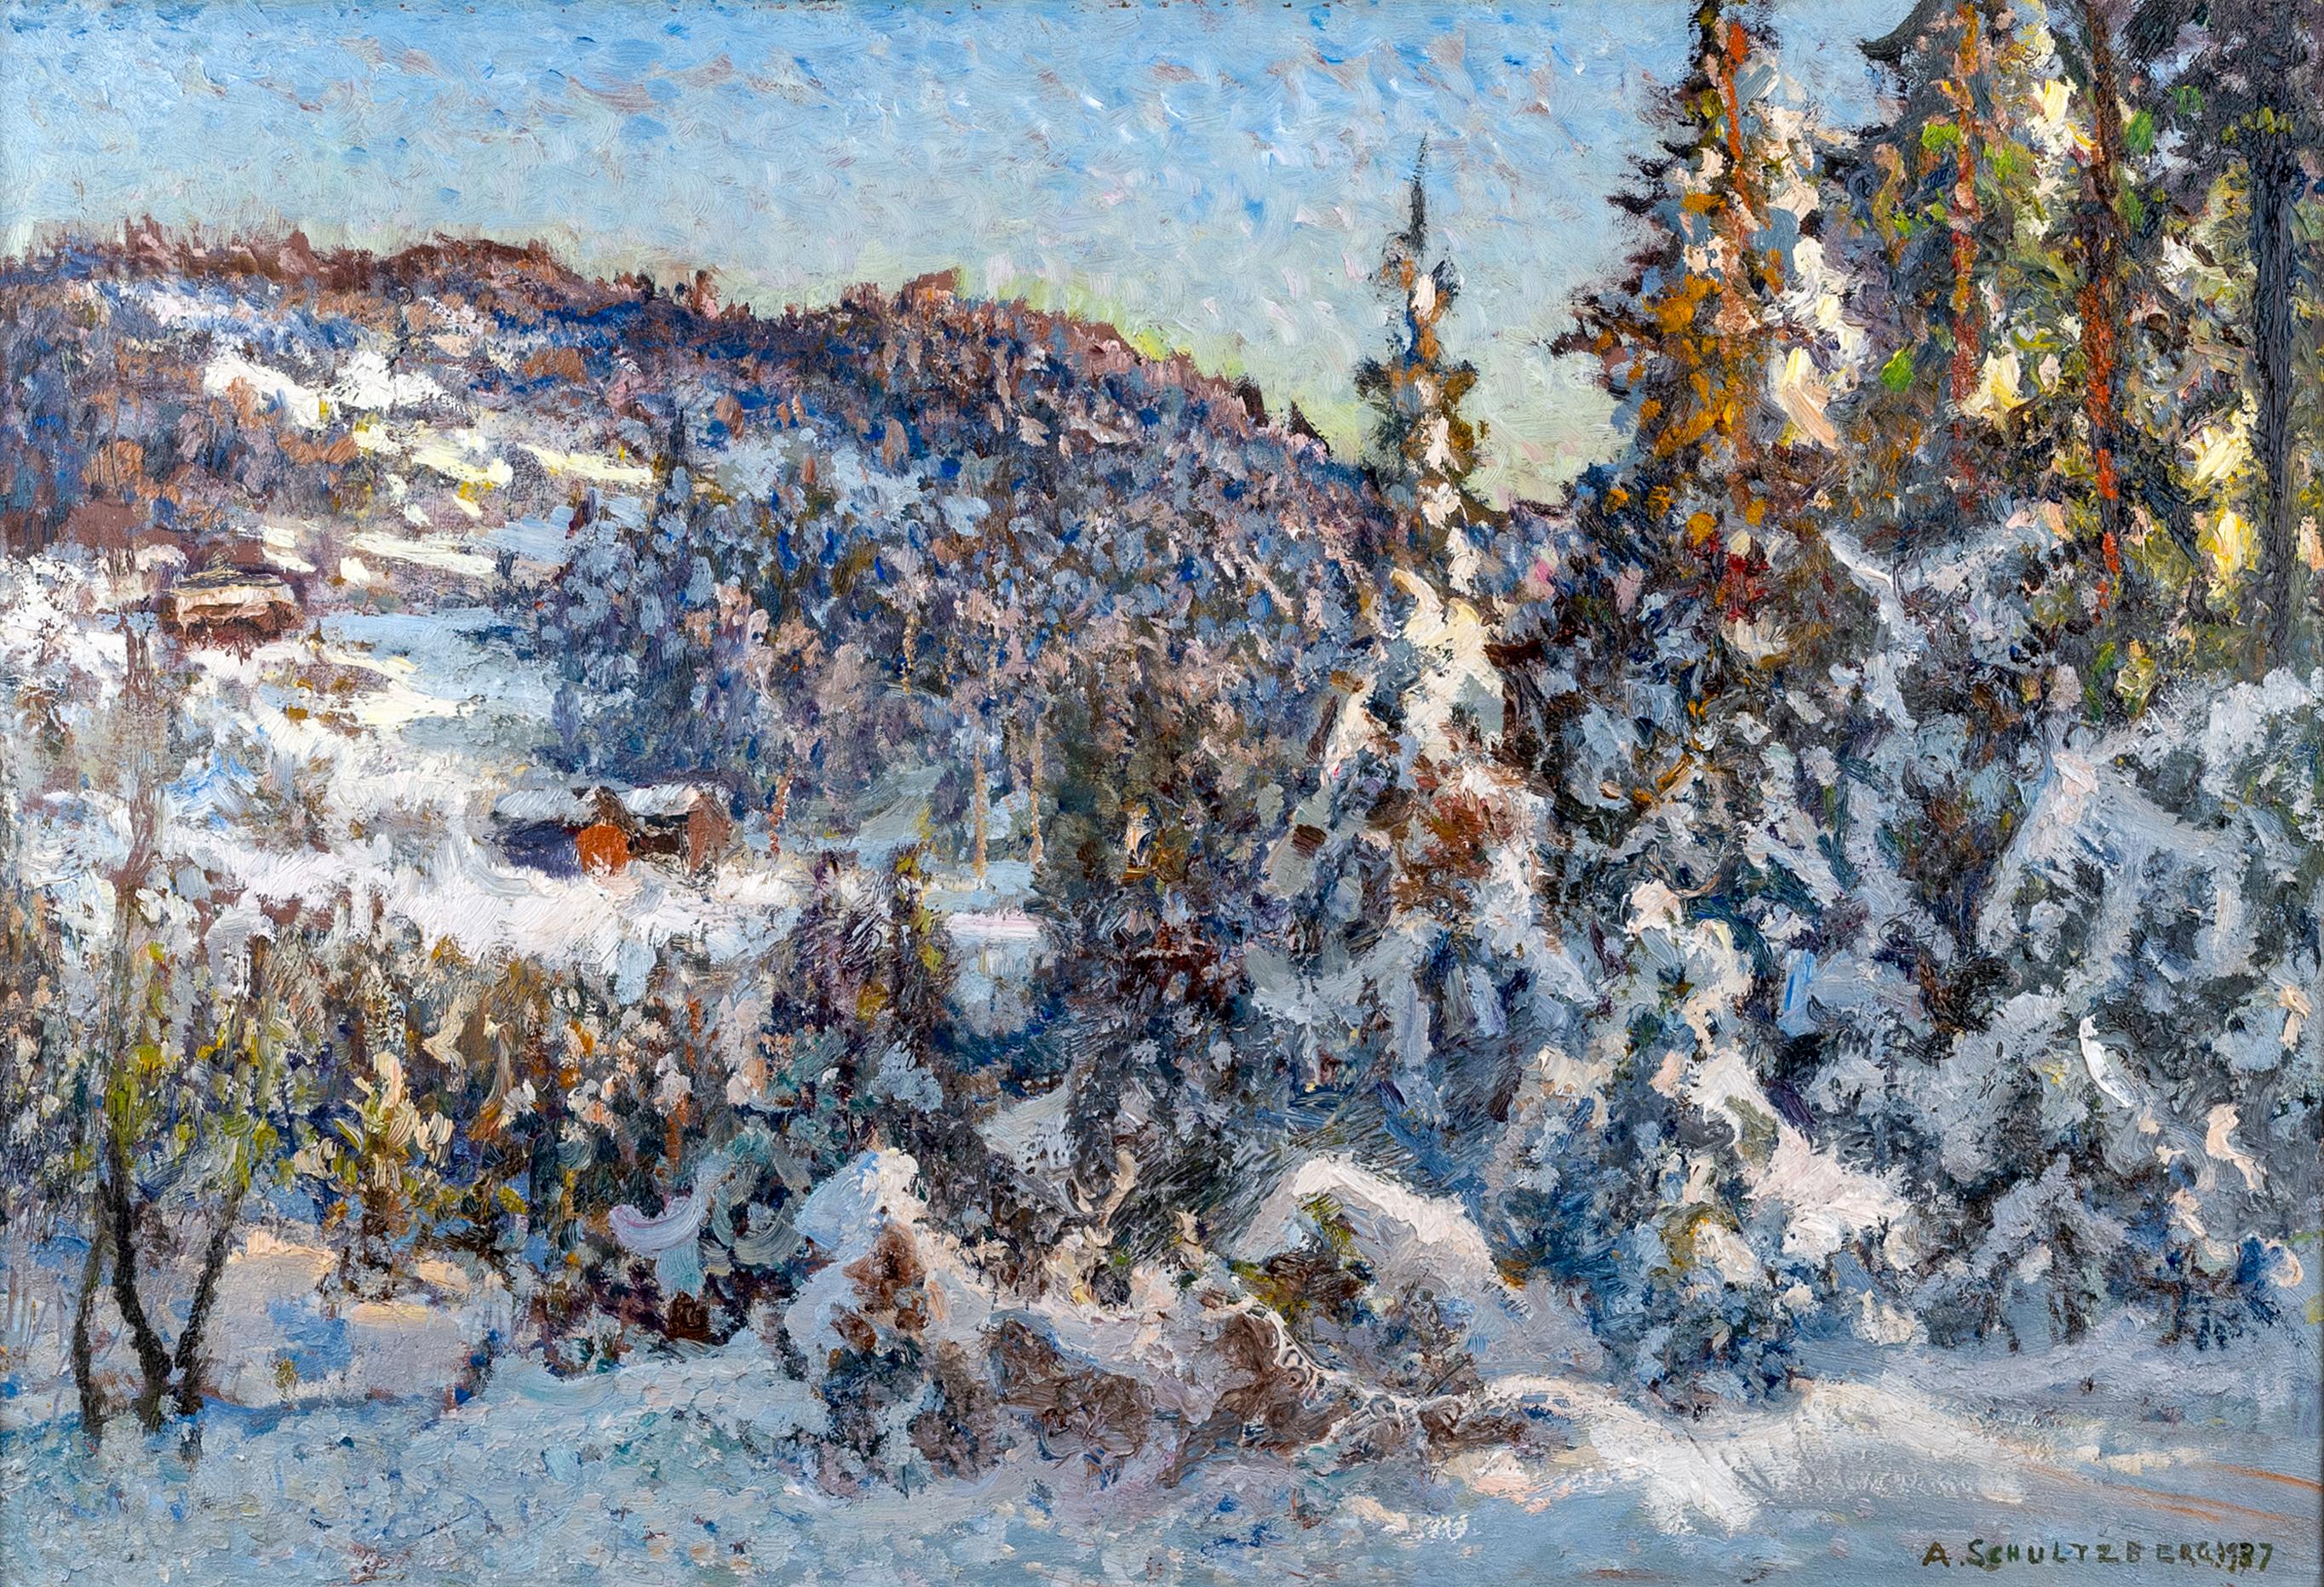 Schultzberg always captured the effects of sunlight on a winter landscape, working confidently with thick impasto.'Snowy Scene' is a beautiful example of his work, showing the woodland landscape thick with snow and bright pops of colour.